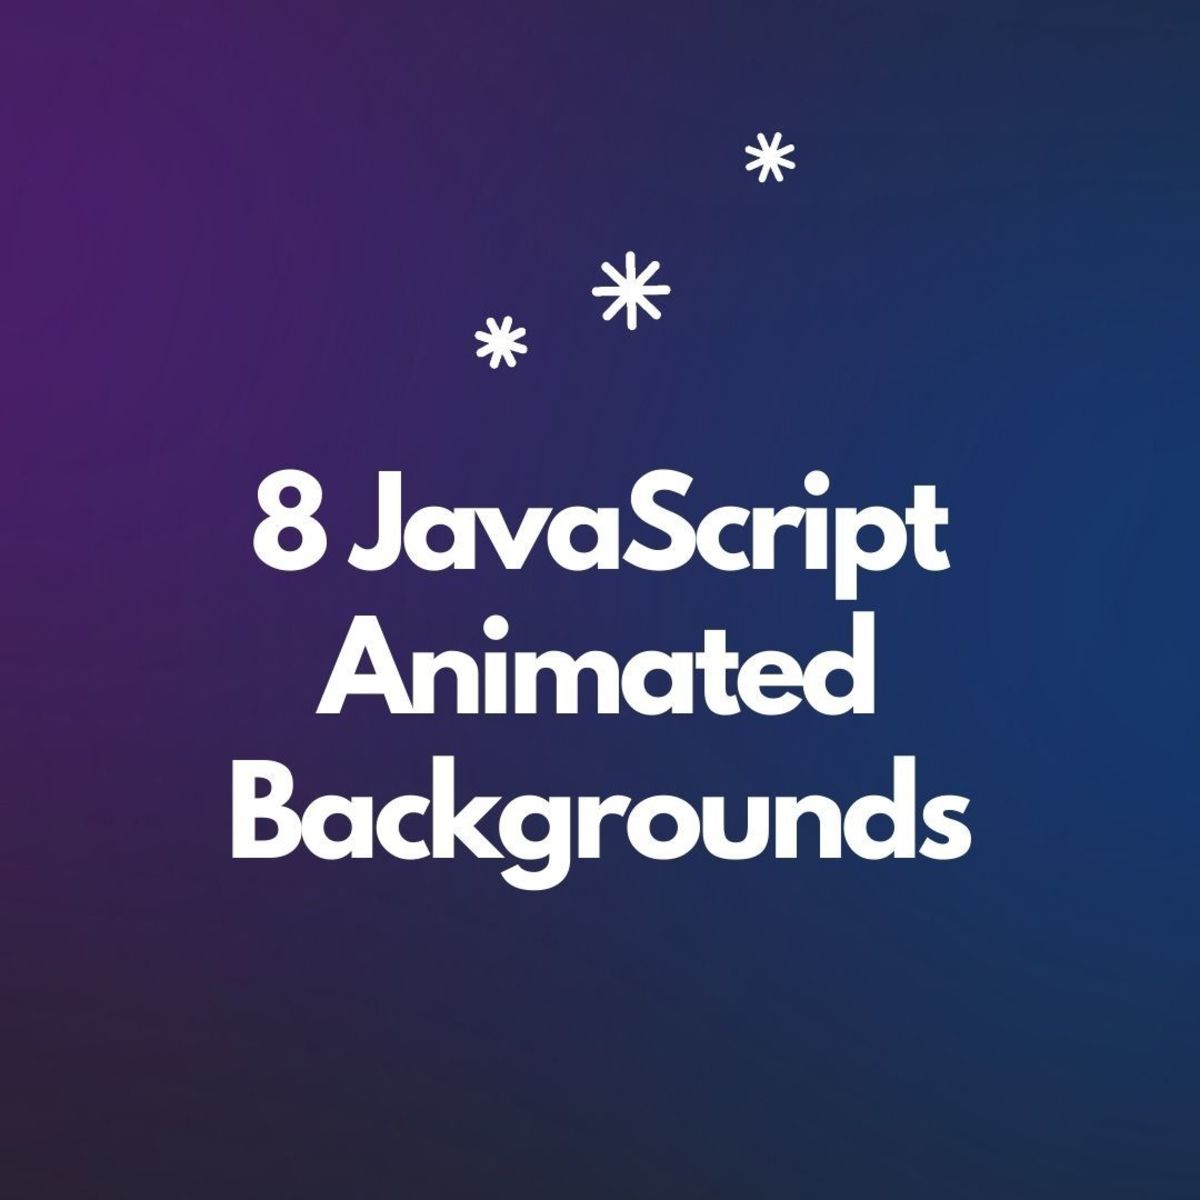 Discover some of the best JavaScript animated backgrounds in this comprehensive guide!